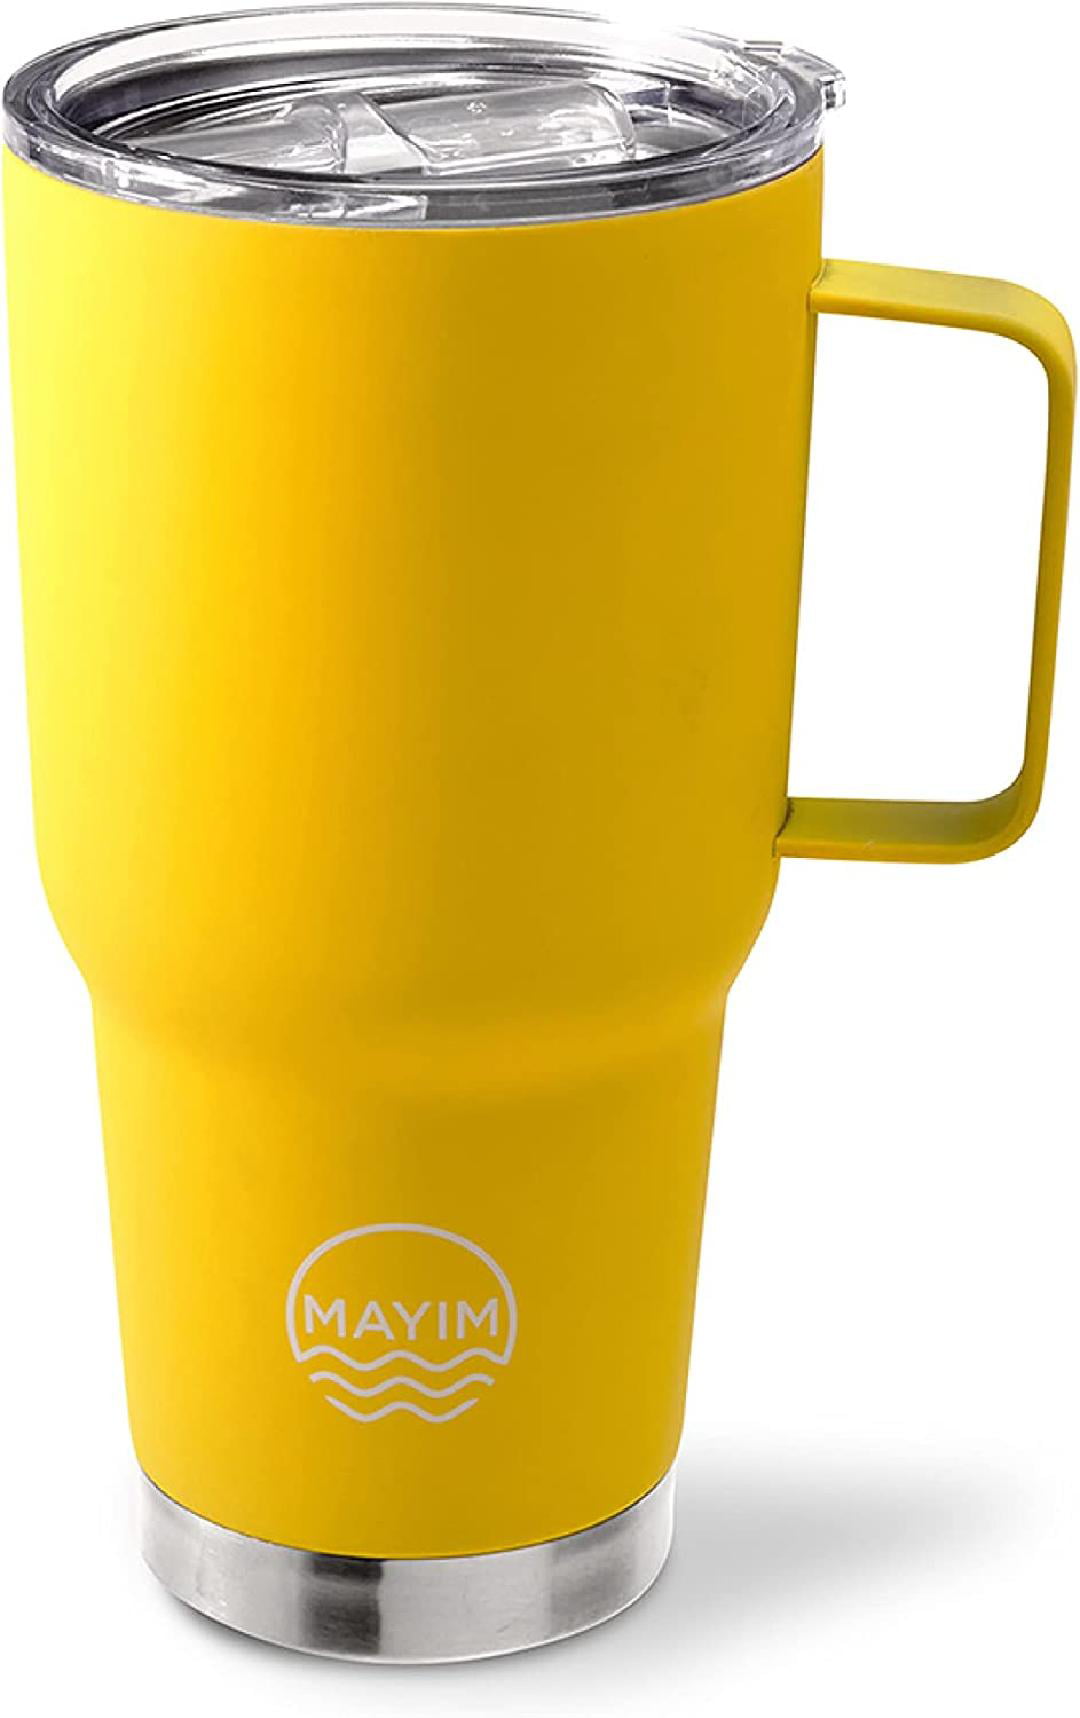 Mayim Large Travel Coffee Mug Tumbler with Clear Slide Lid and  Handle, Reusable Vacuum Insulated Double-Wall Stainless-Steel Thermos, Fits  in Cup Holder, 30oz., Blush: Tumblers & Water Glasses